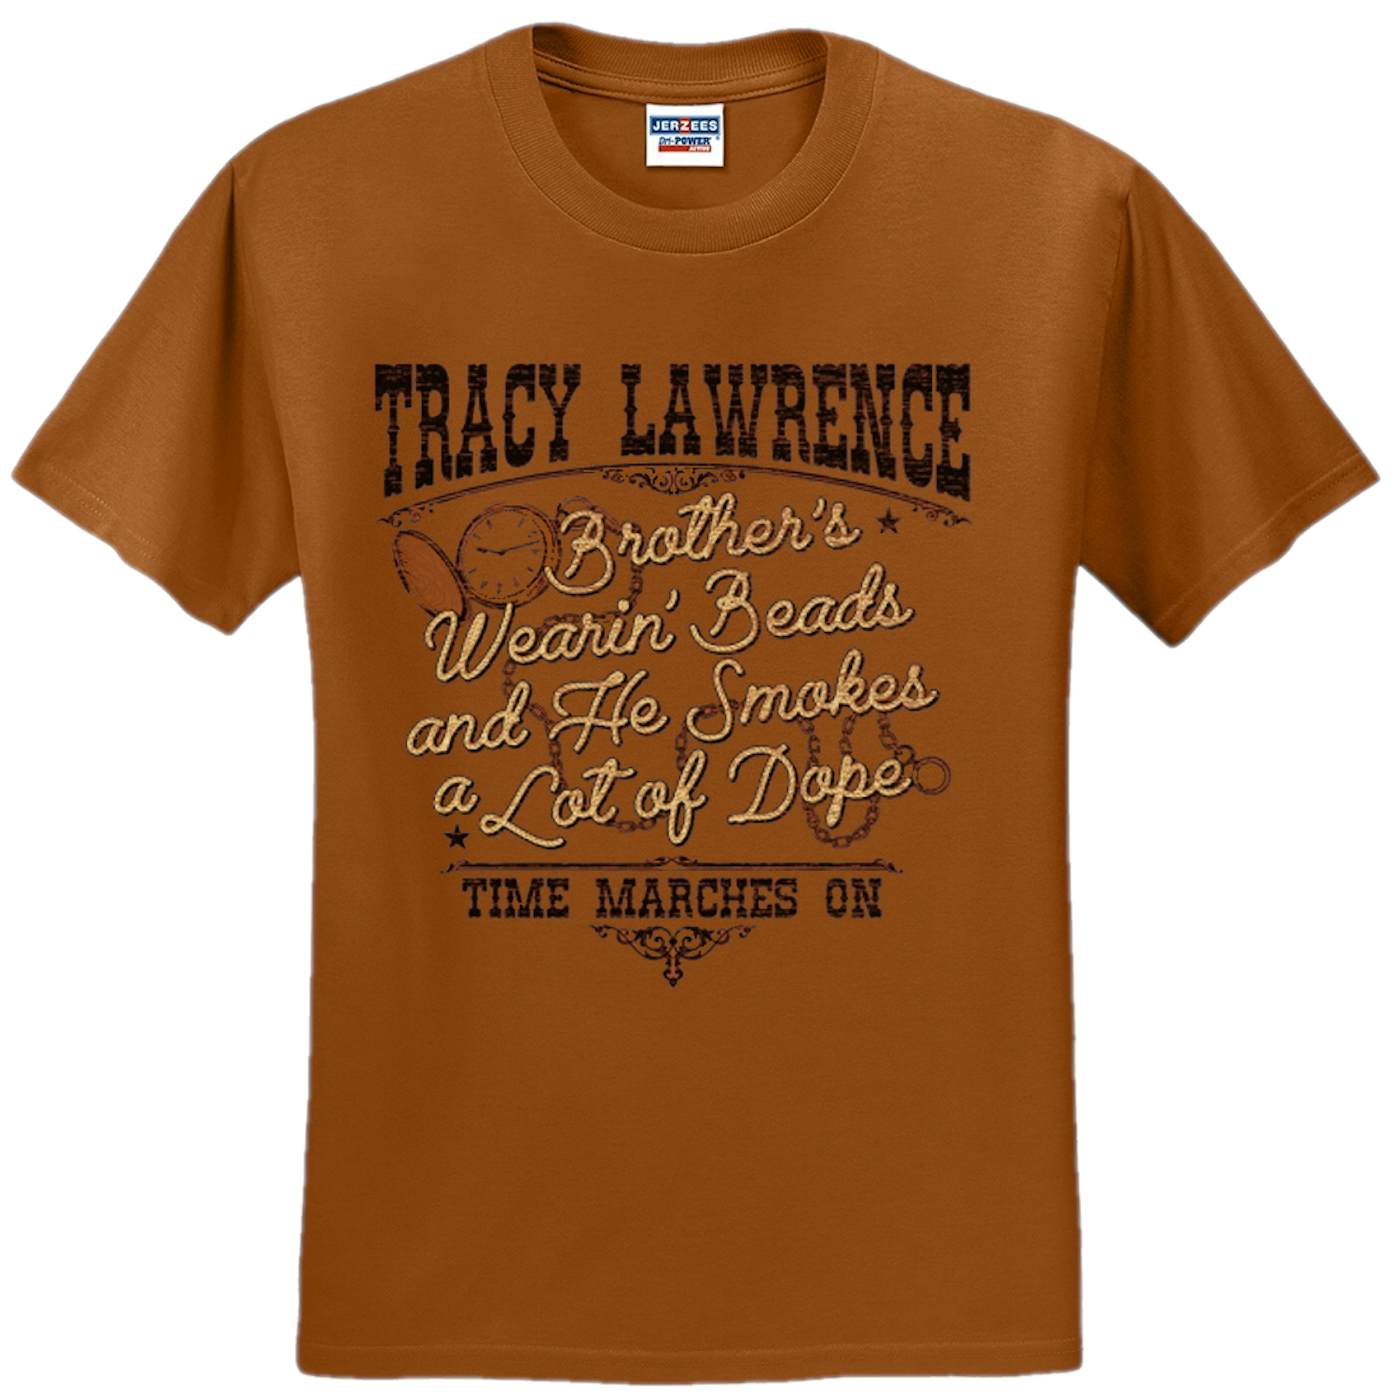 Tracy Lawrence Texas Orange Time Marches On Tee